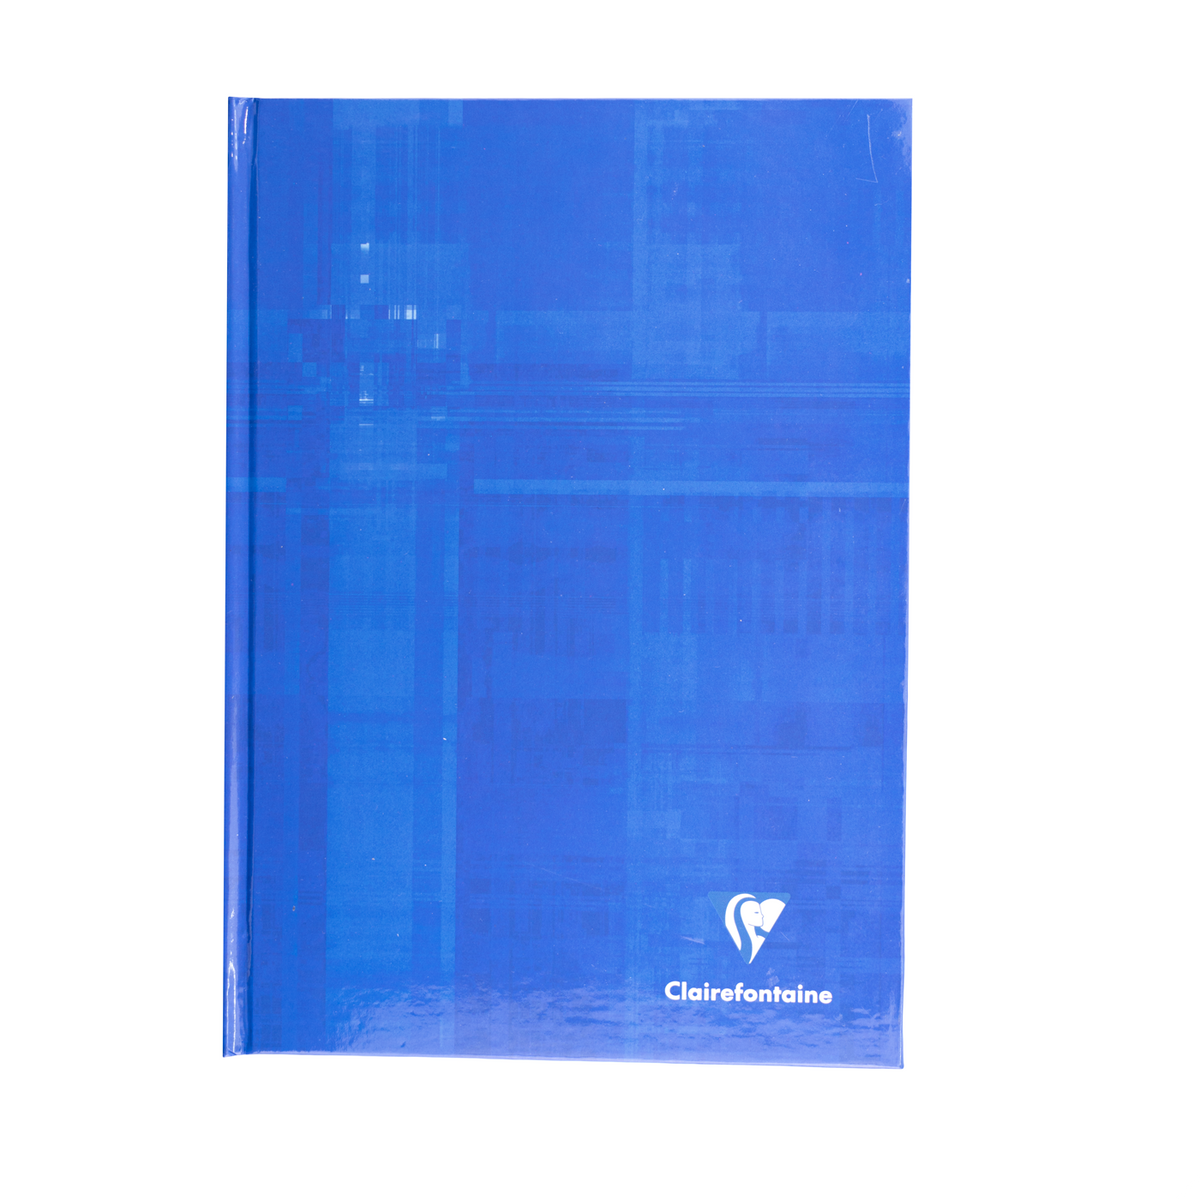 Clairefontaine Classics A5 Hardcover Notebook- Blue